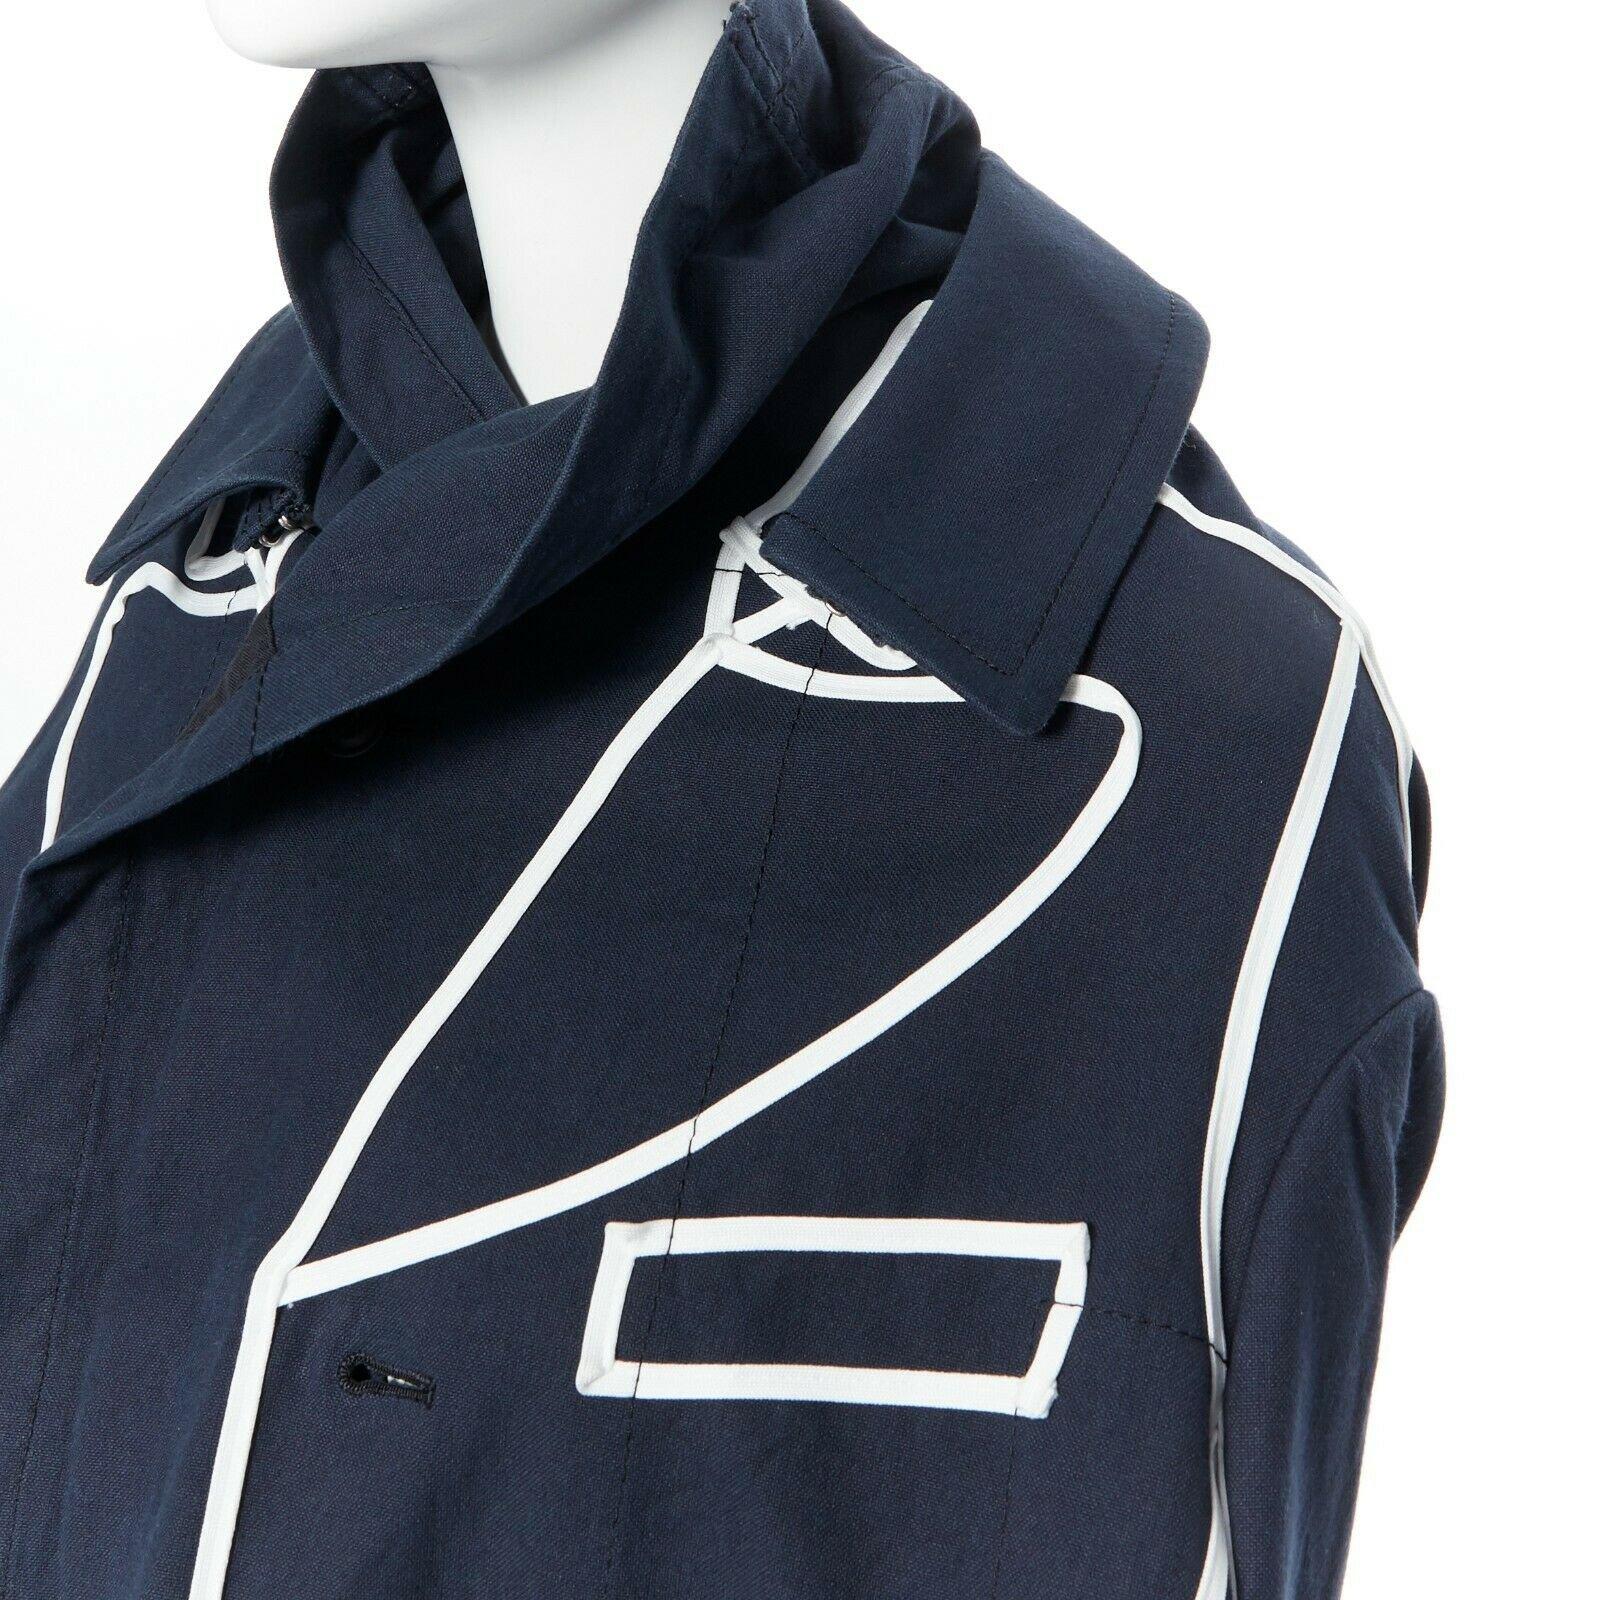 runway COMME DES GARCONS AW09 REI KAWAKUBO navy blue trompe l'oeil coat jacket S 
Reference: TGAS/A03226 
Brand: Comme Des Garcons 
Designer: Rei Kawakubo 
Collection: Fall Winter 2009 Runway 
Material: Cotton 
Color: Navy 
Pattern: Solid 
Closure: